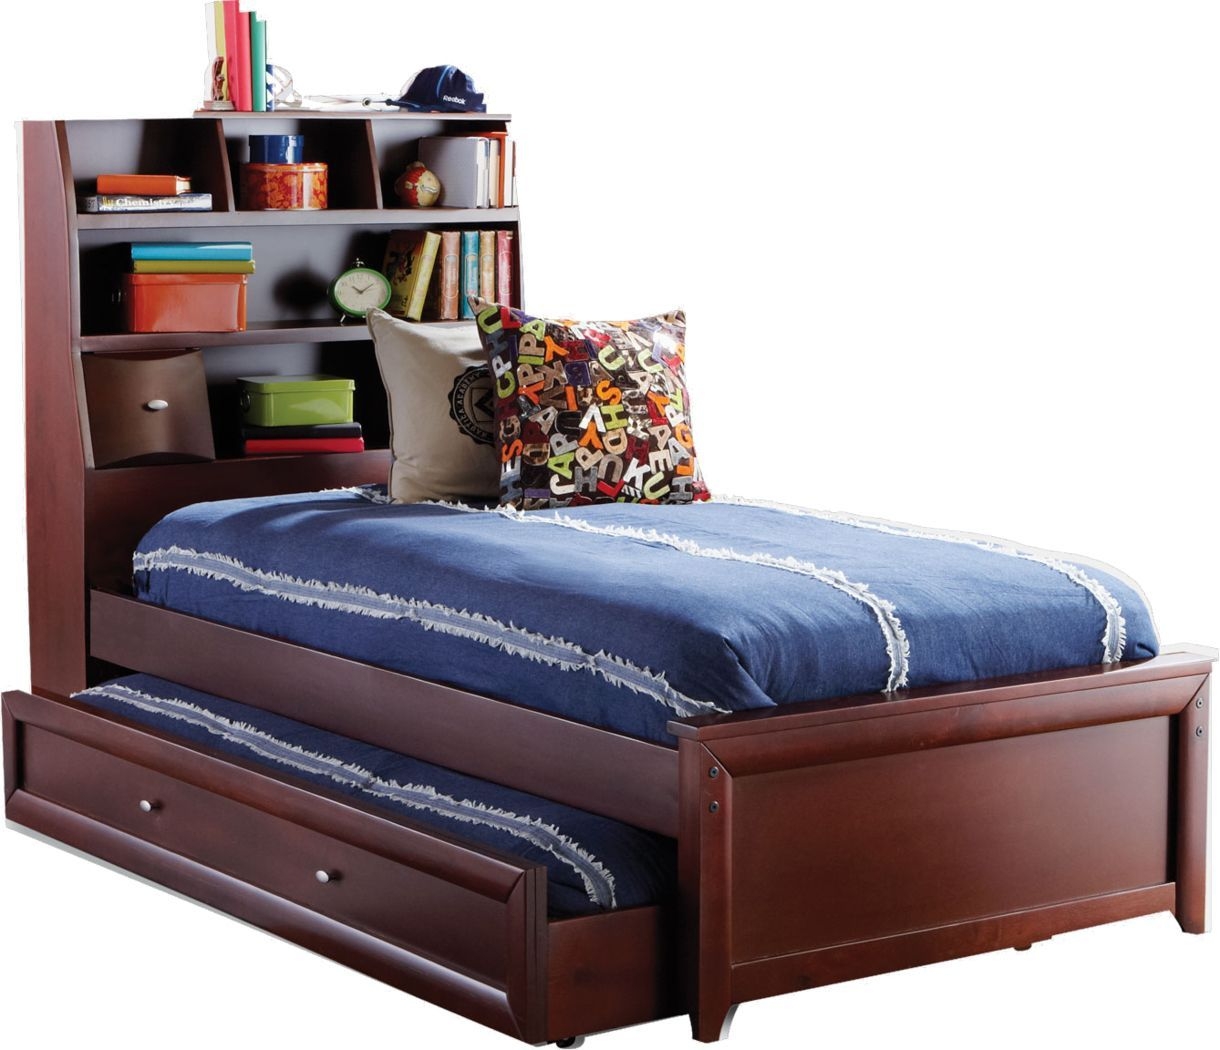 Trundle bed with bookcase